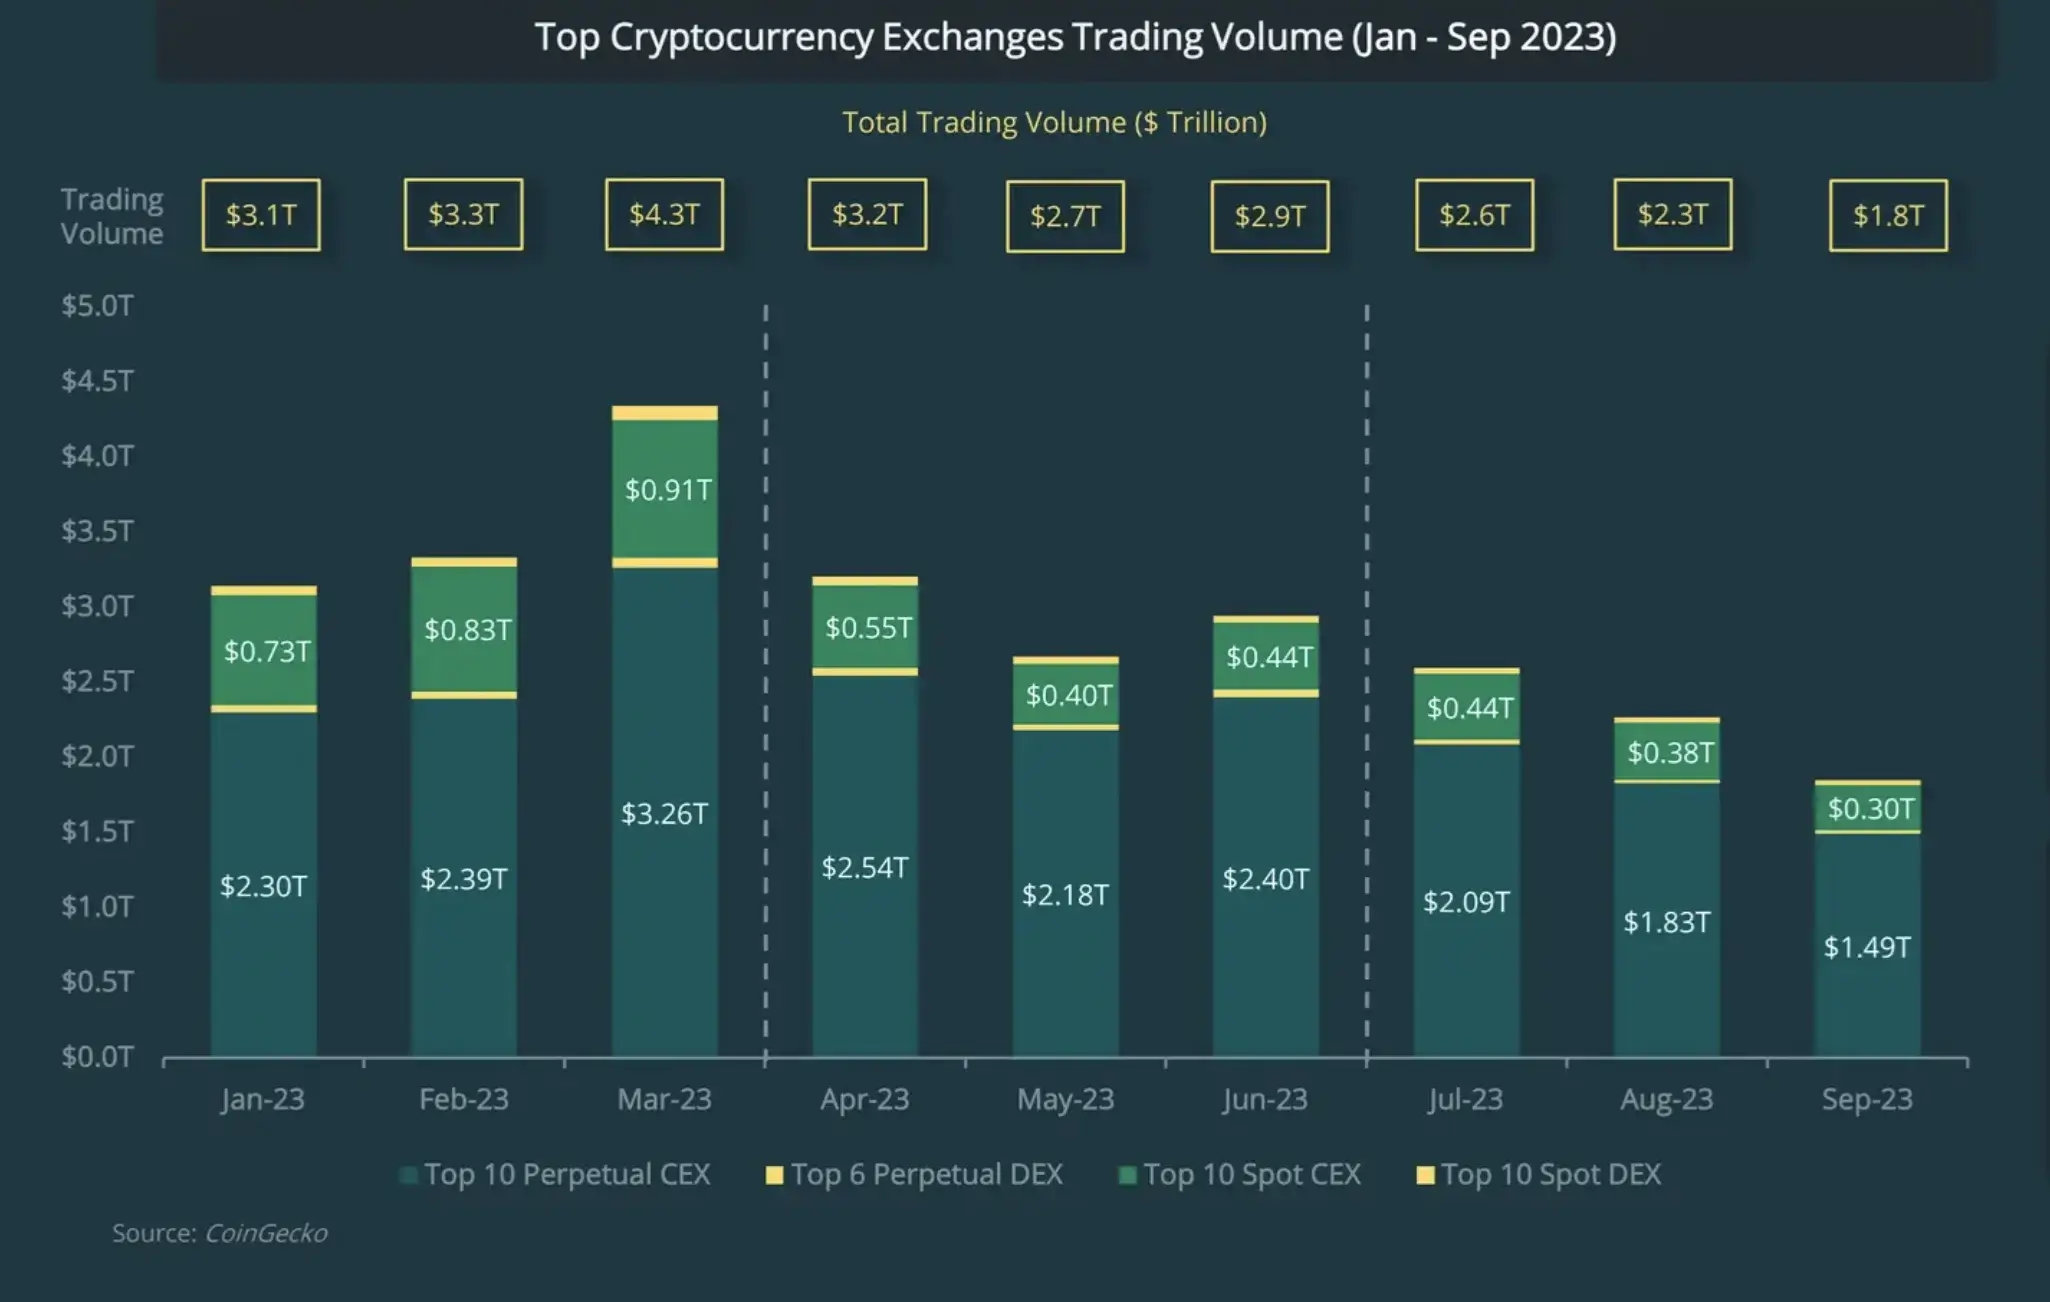 Q3 Top Crypto Exchanges Trading Volumes